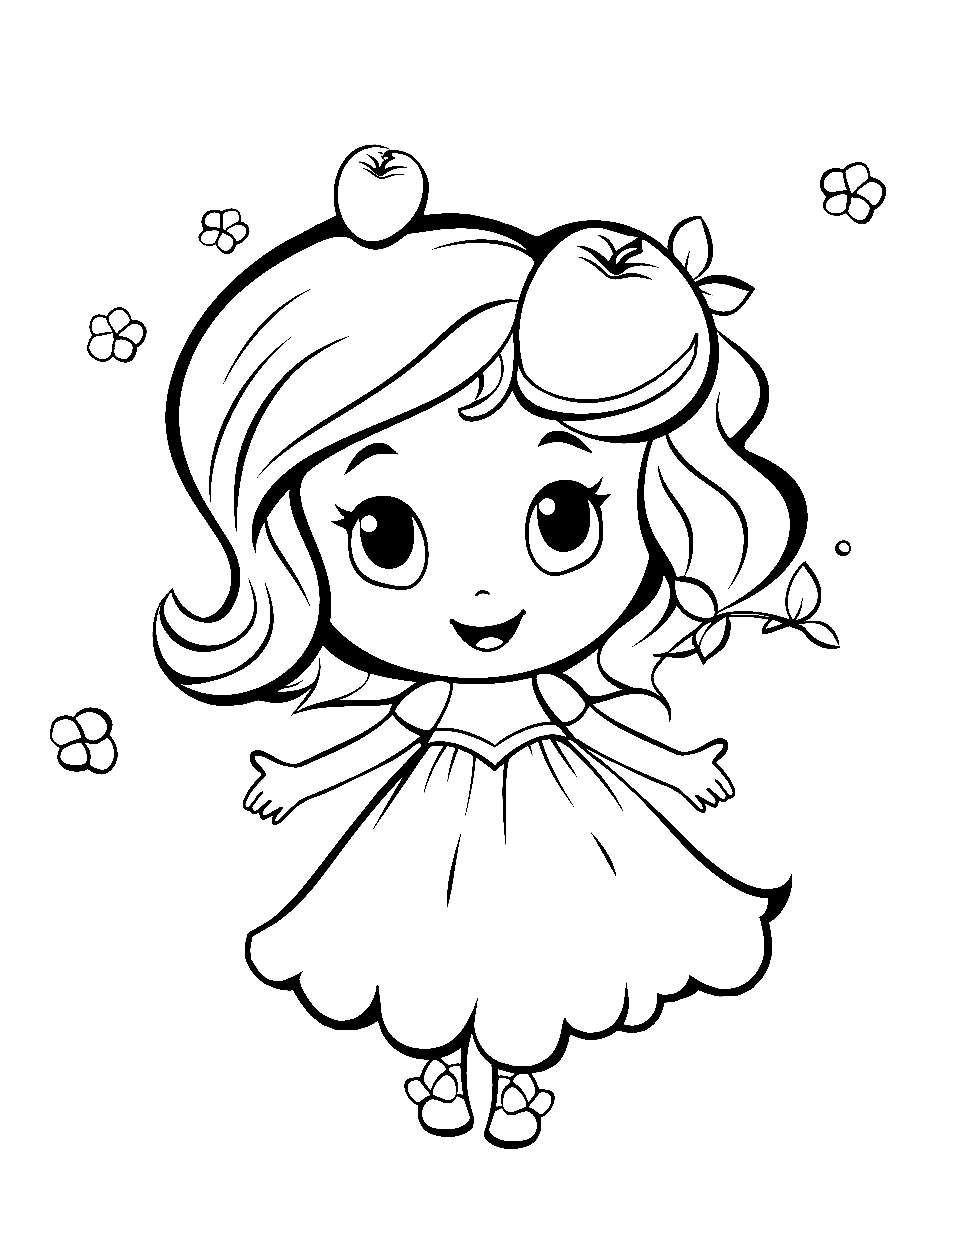 Apple Blossom Dance Coloring Page - Apple Blossom Shopkin twirling around.